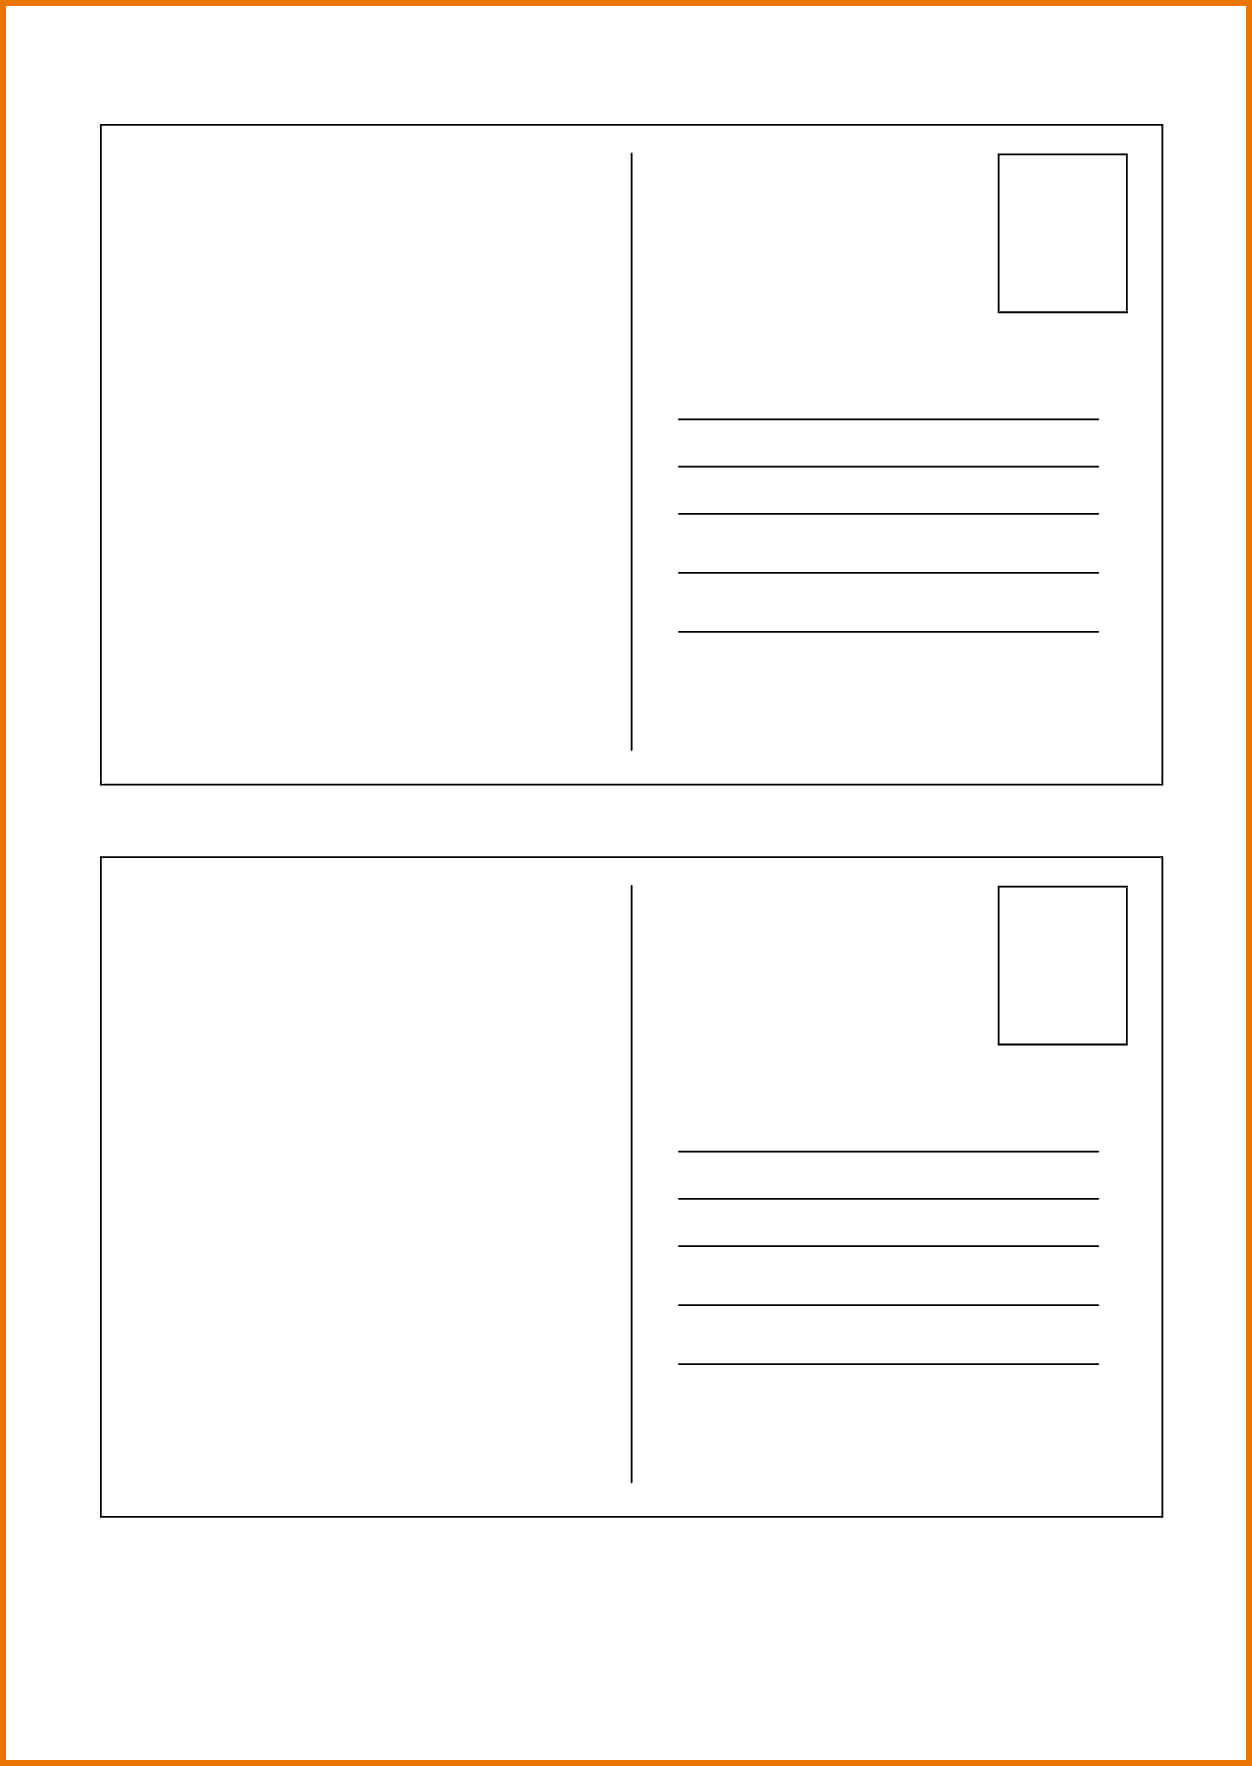 036 Template Ideas Blank Postcard Free Classic White With Within Microsoft Word 4X6 Postcard Template